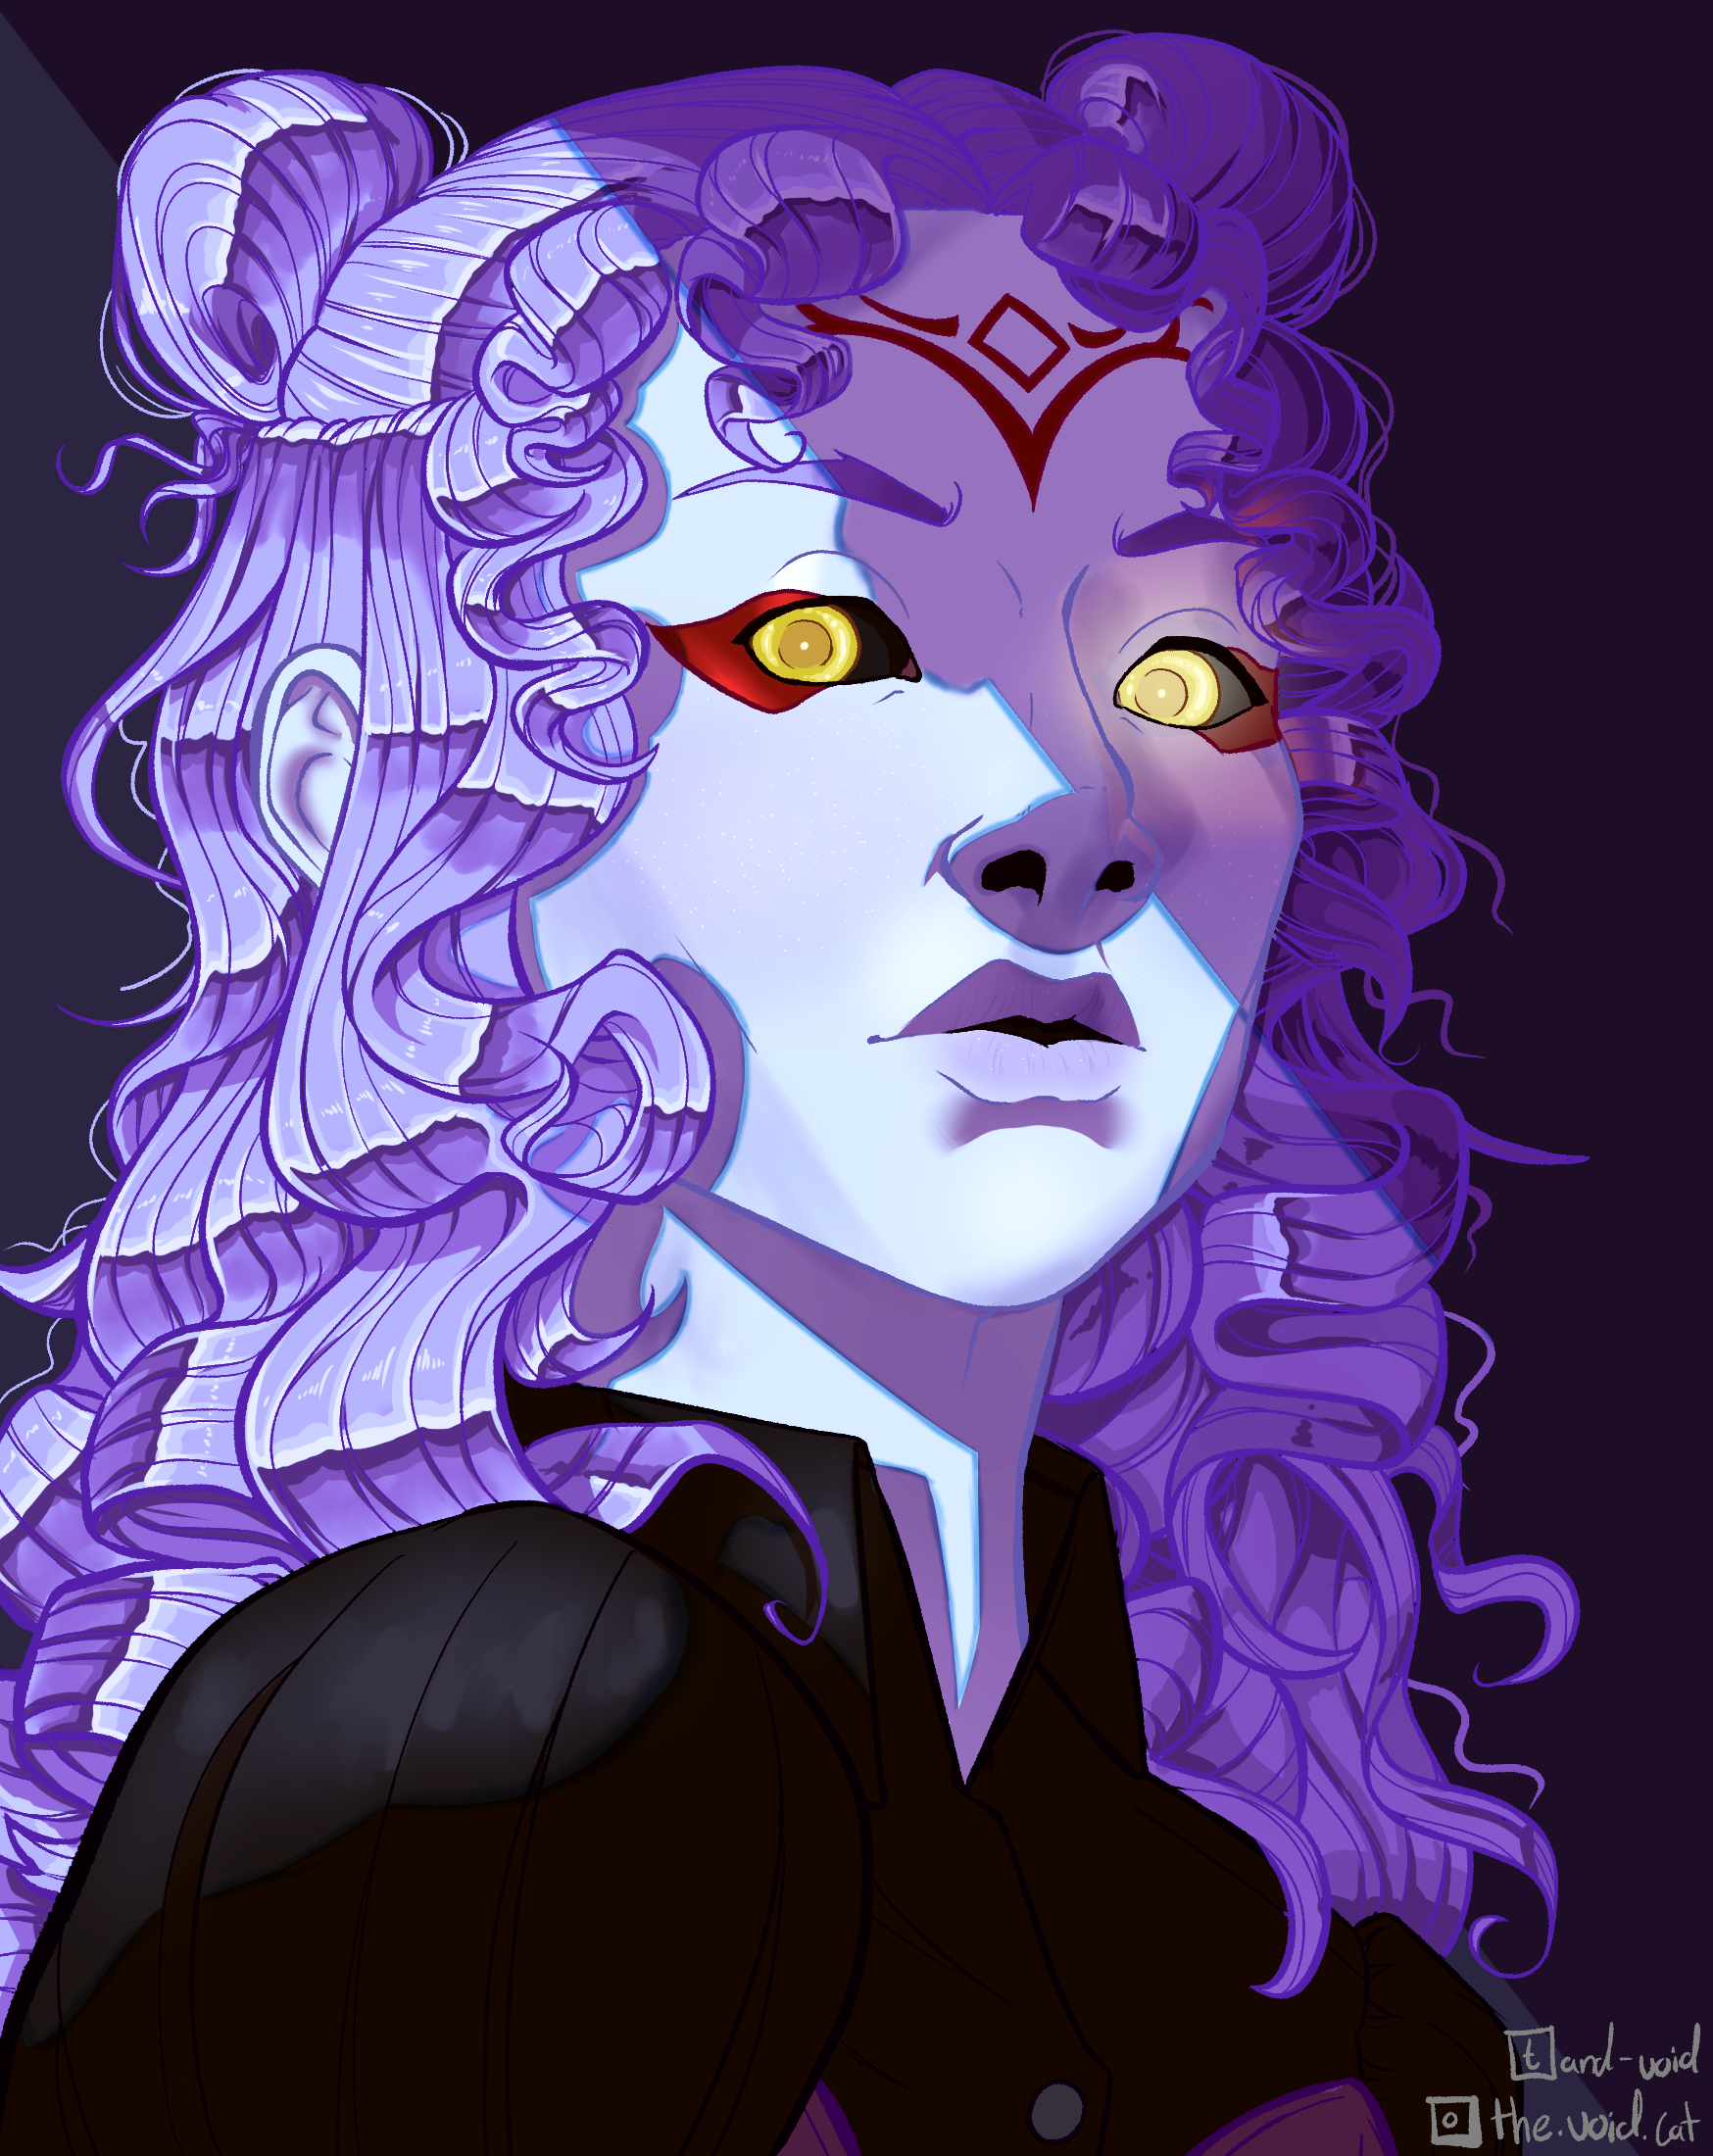 A shoulders-up portrait of Sioban, a fortune teller. Her skin is almost sheet white and she has long, curly, purple hair, which is down on the sides and tied into space buns on top. Her eyes are glowing yellow and she stares menacingly into the camera, half of her face cast in shadow. There is a symmetrical, red sigil on her forehead and she's wearing red eye makeup. She's wearing a black blouse and purple corset over it.